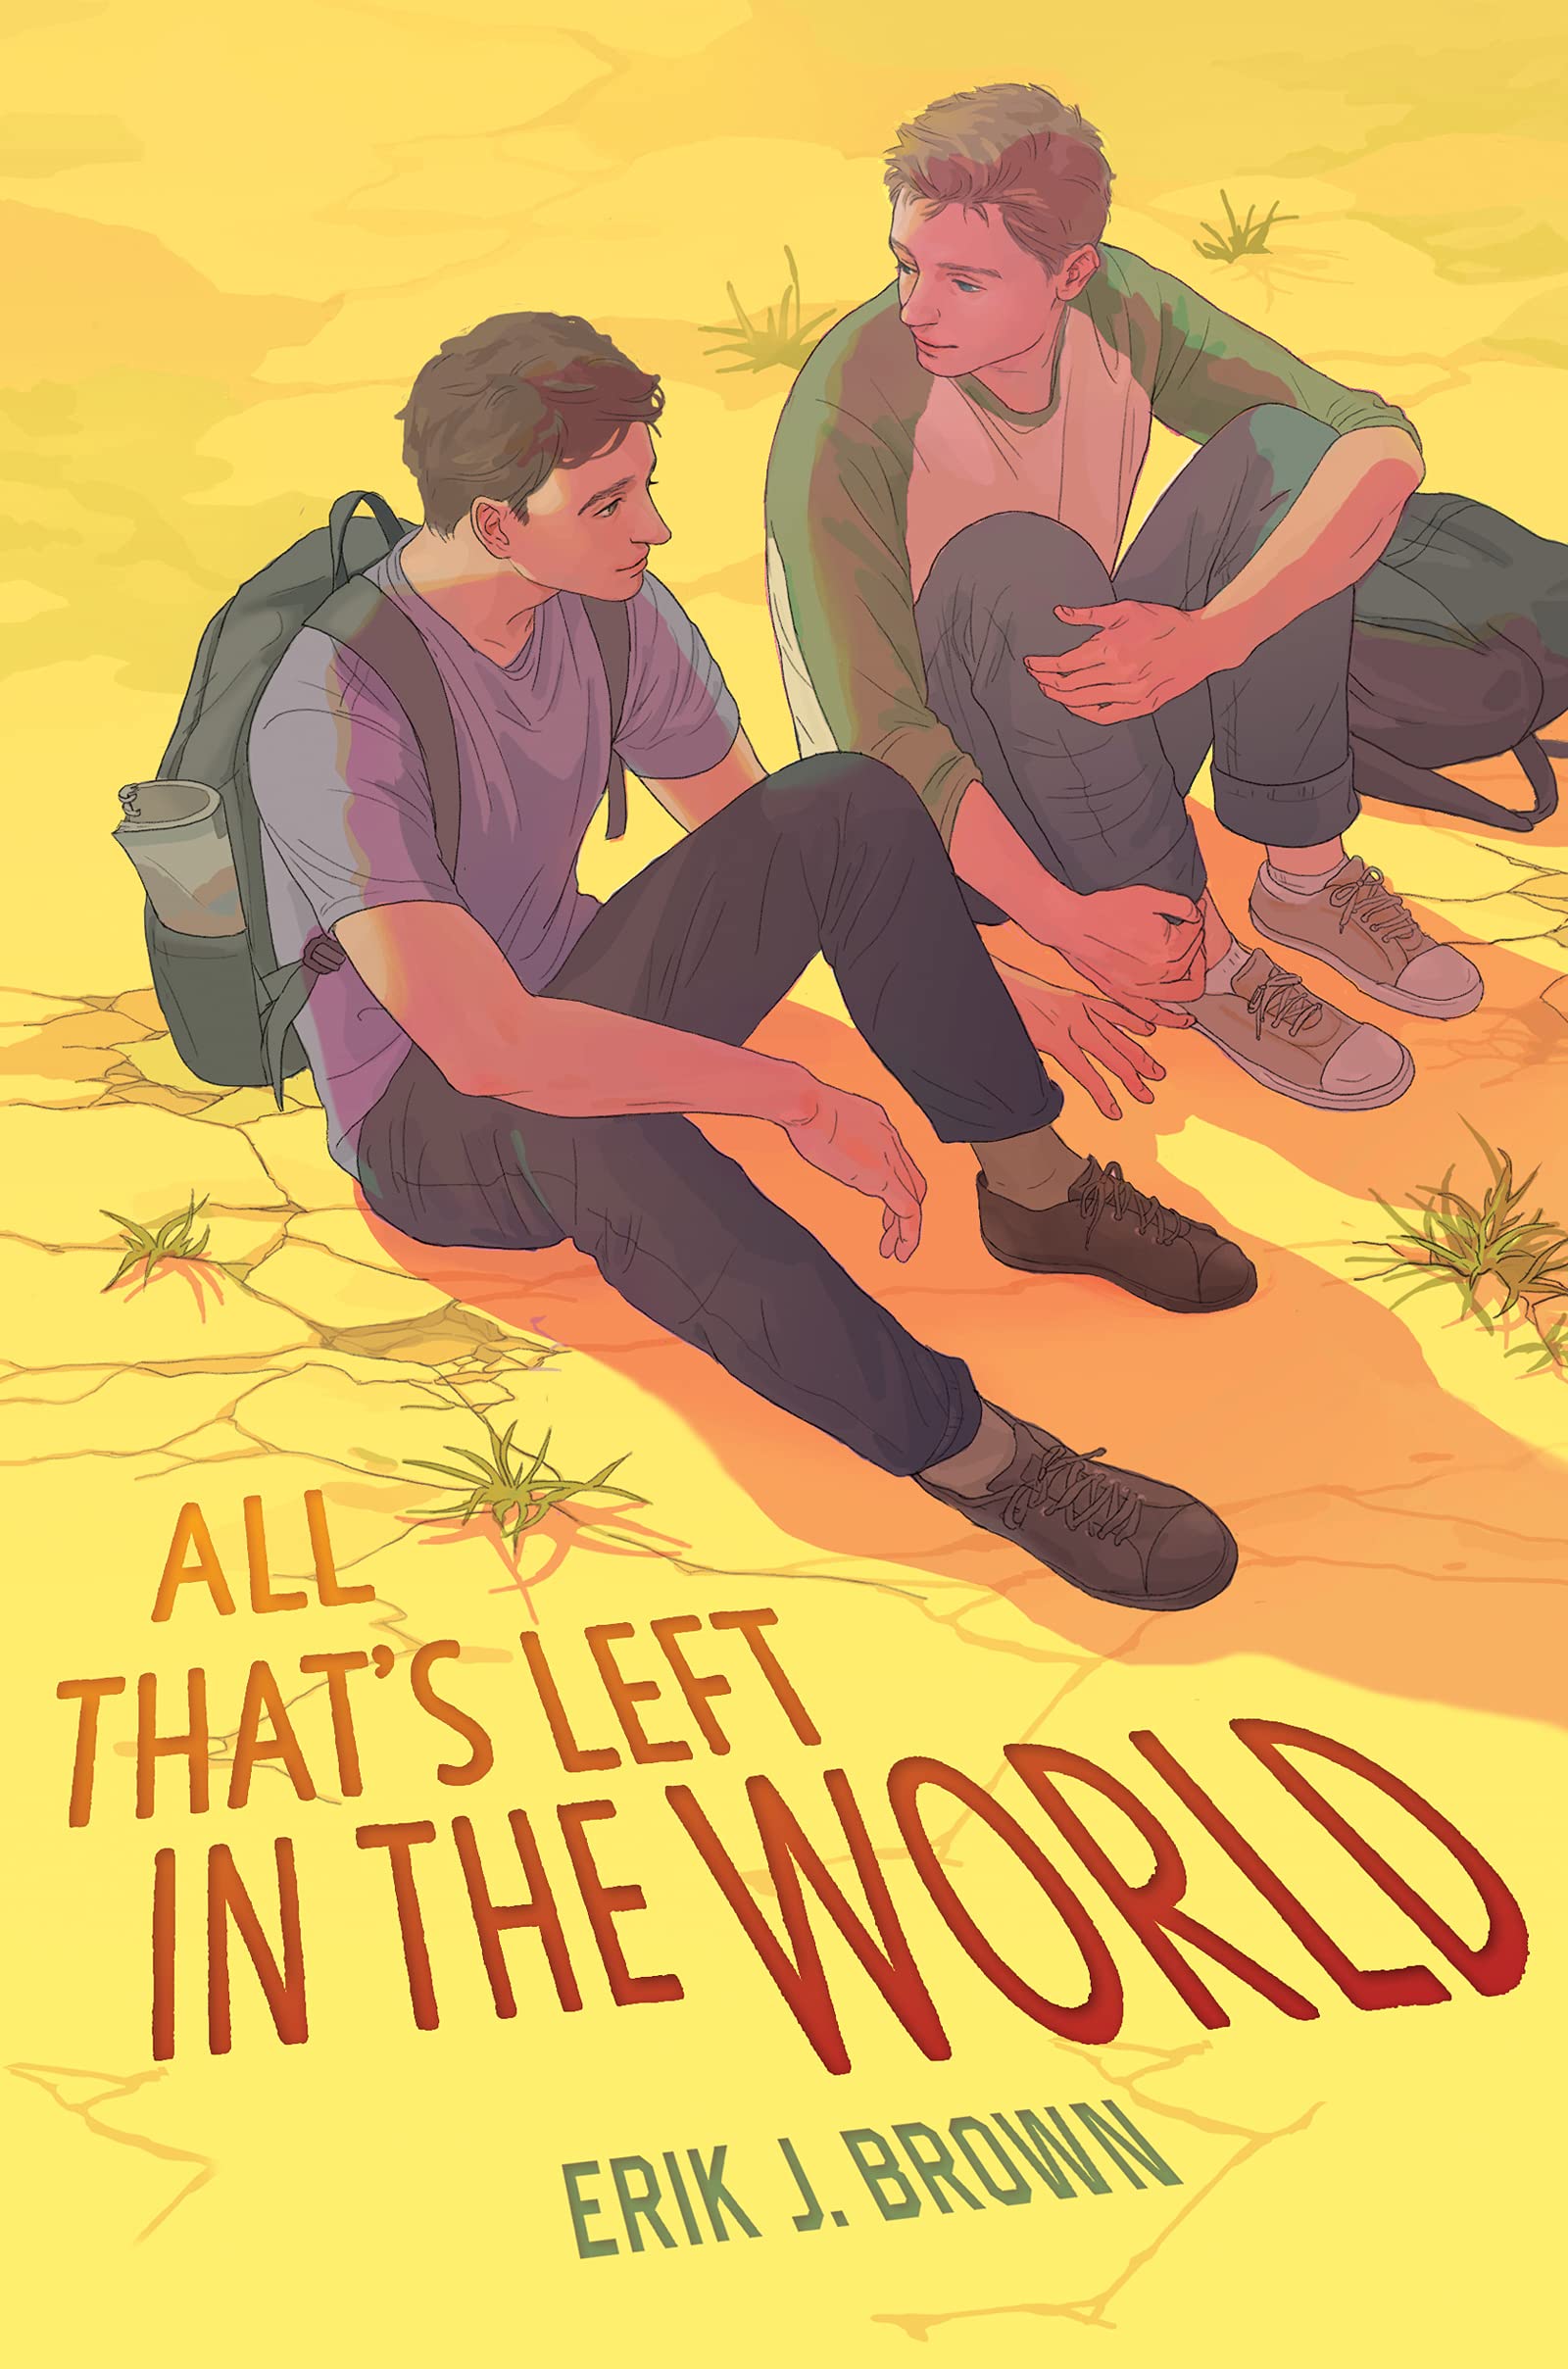 Cover of "All That's Left in the World"